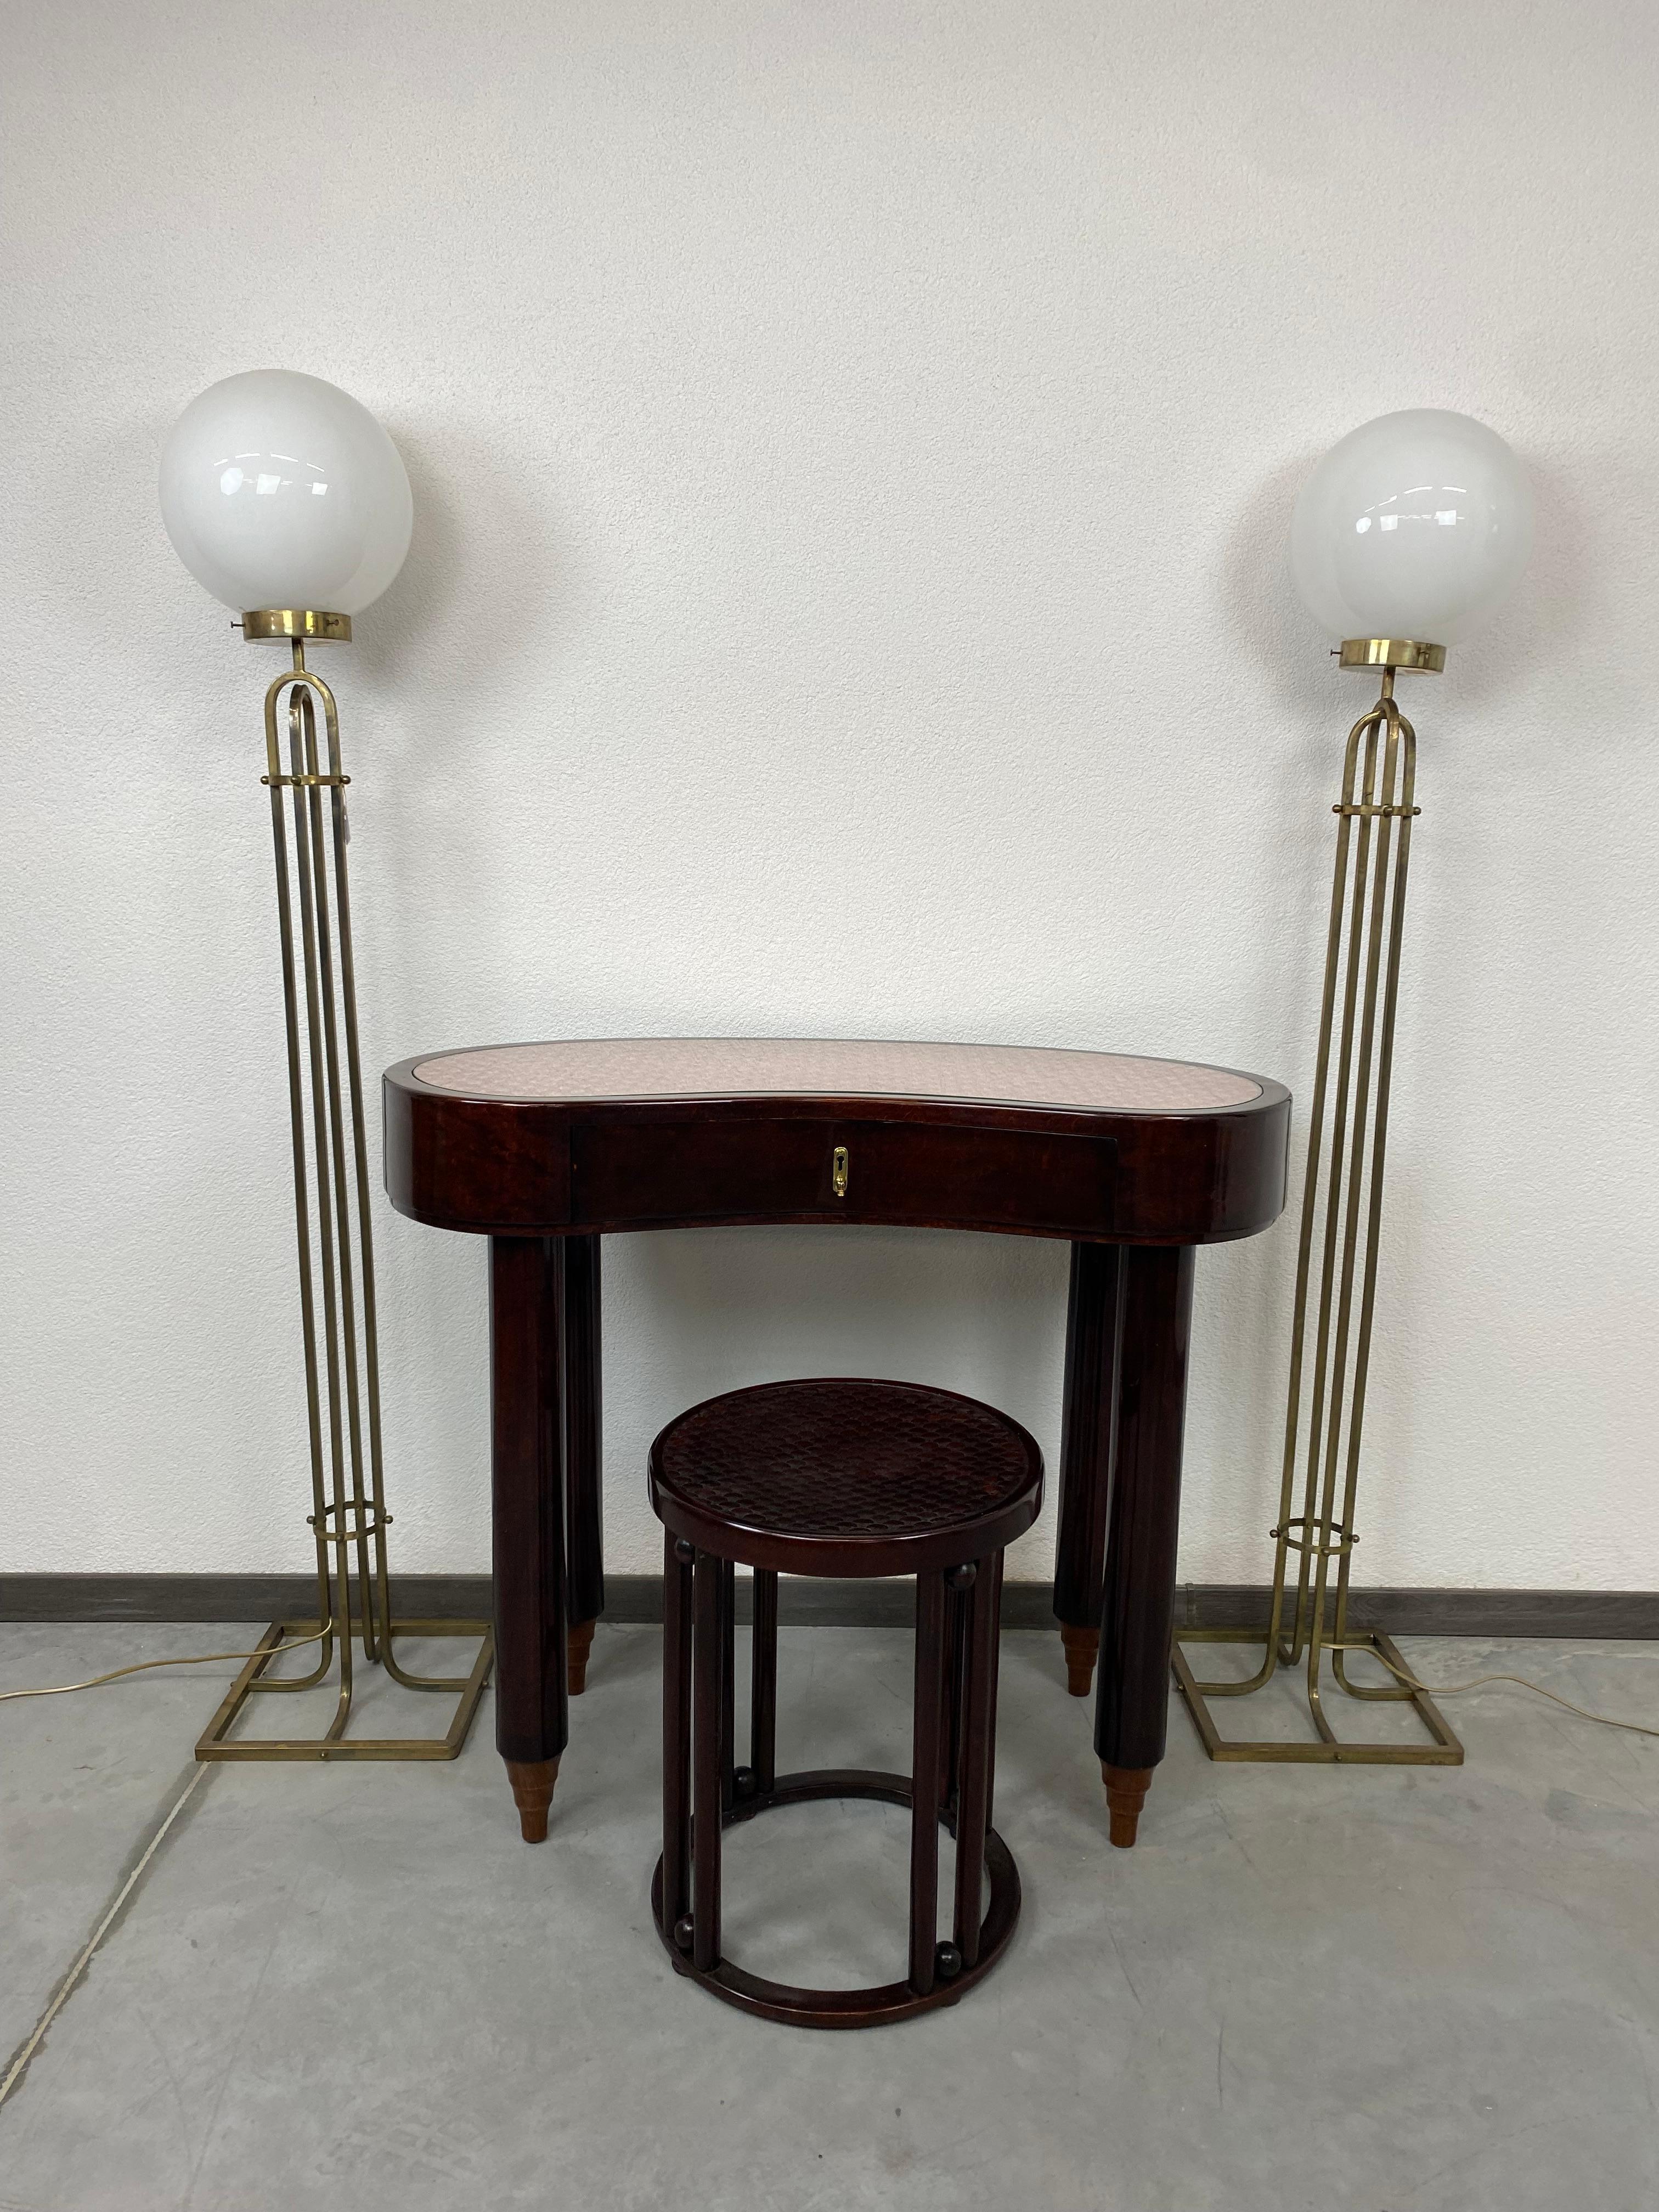 Secession side table Otto Prutscher. Professionally stained and repolished.